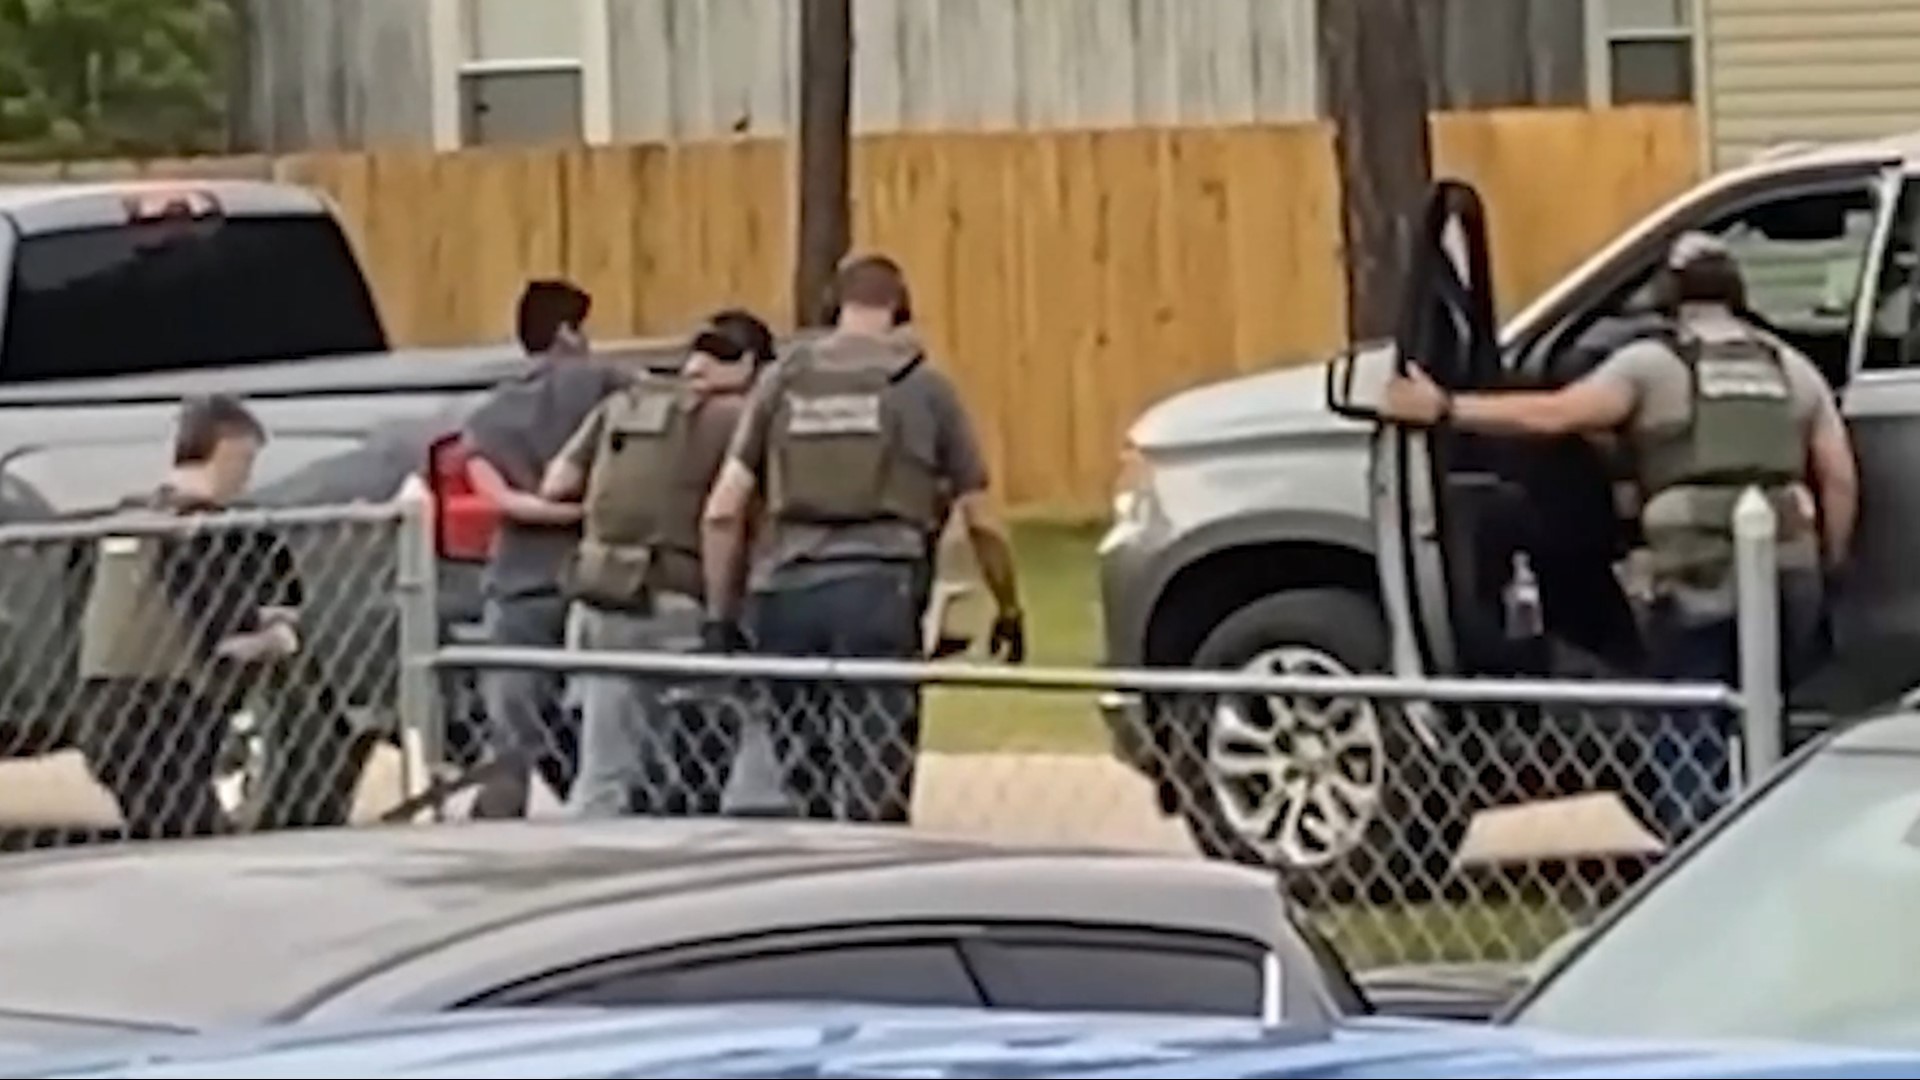 Francisco Oropeza was arrested in Cut and Shoot, Texas after a dayslong manhunt following a mass shooting in San Jacinto County.